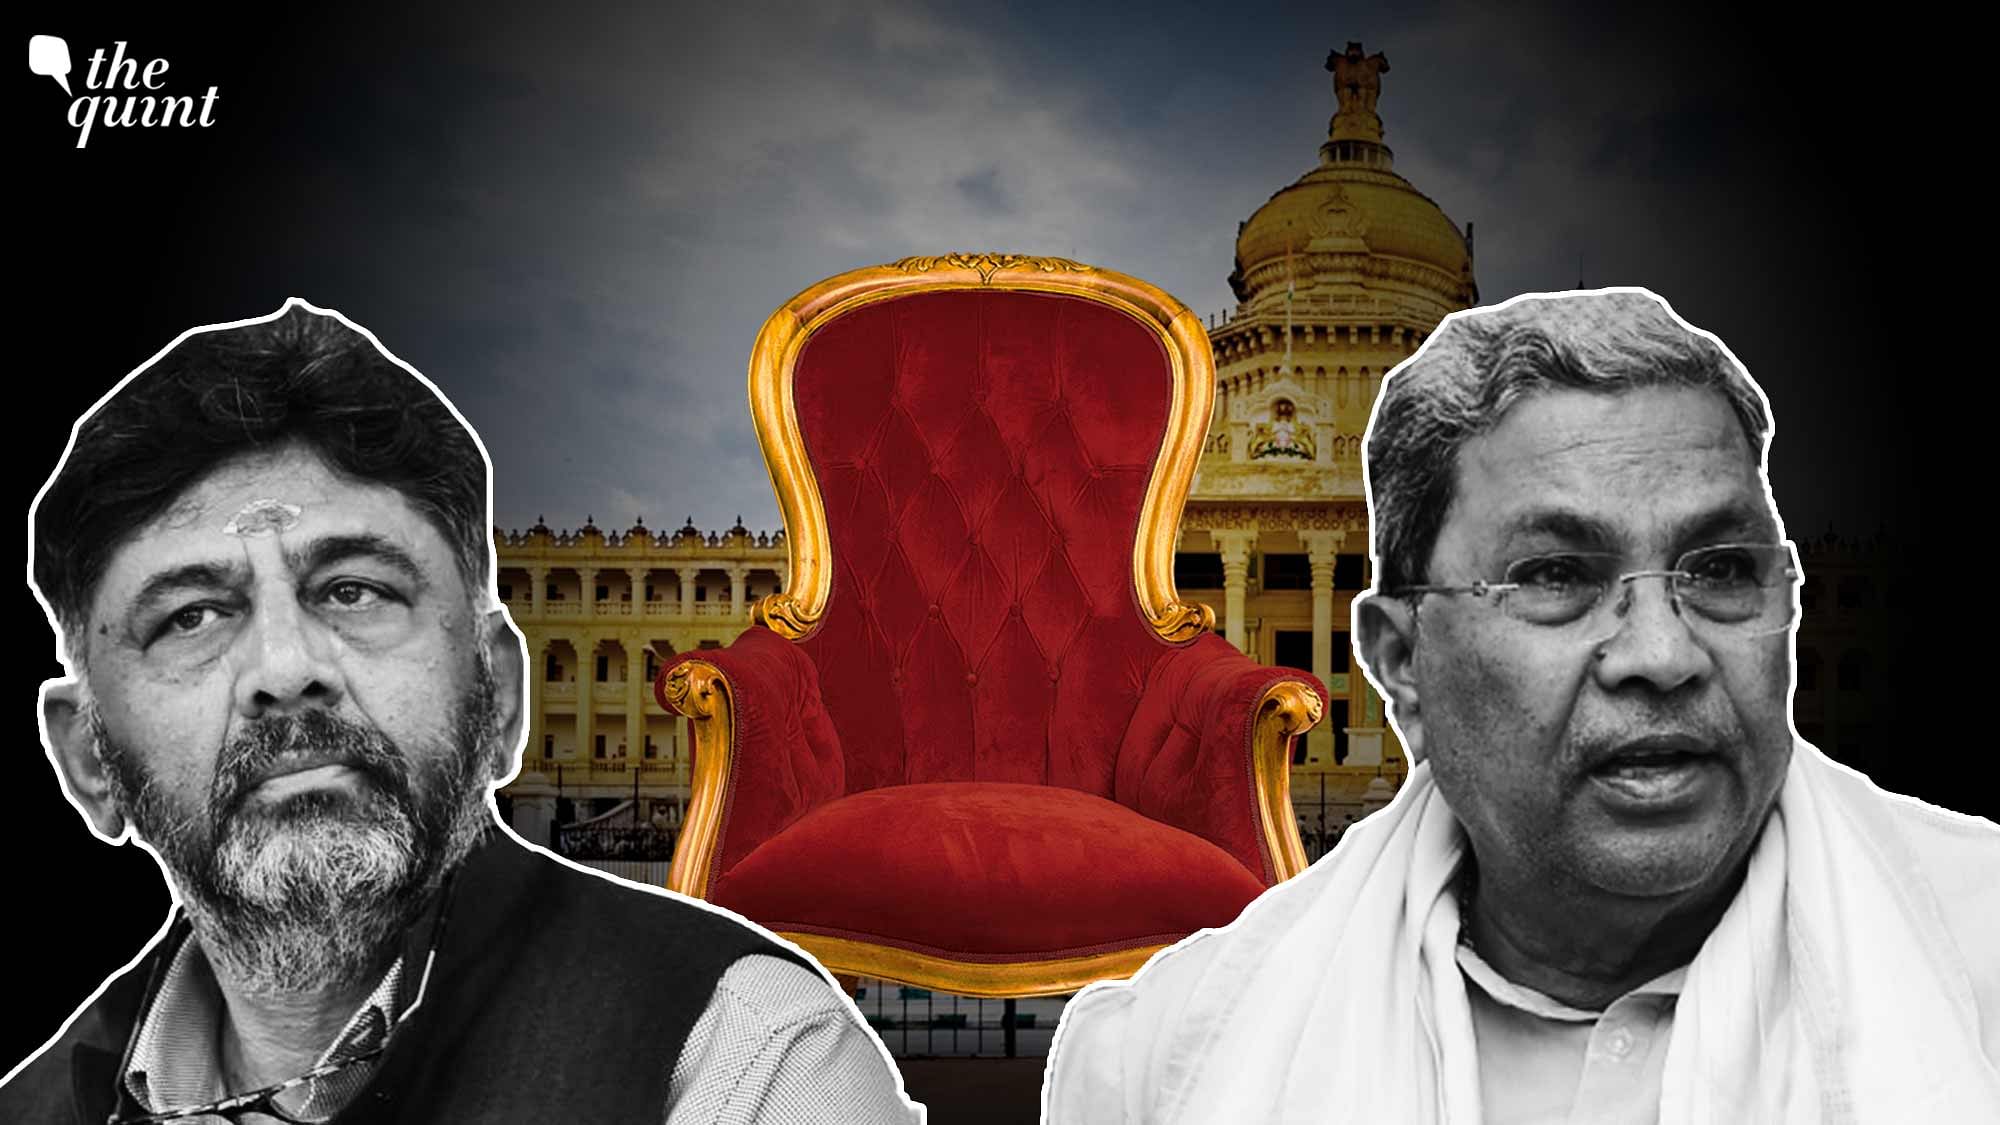 <div class="paragraphs"><p>Differences and ambitions come to fore as Siddaramaiah plans to celebrate his 75th birthday and KPCC president seeks Vokkaliga voters support to be the next chief minister in Karnataka.</p></div>